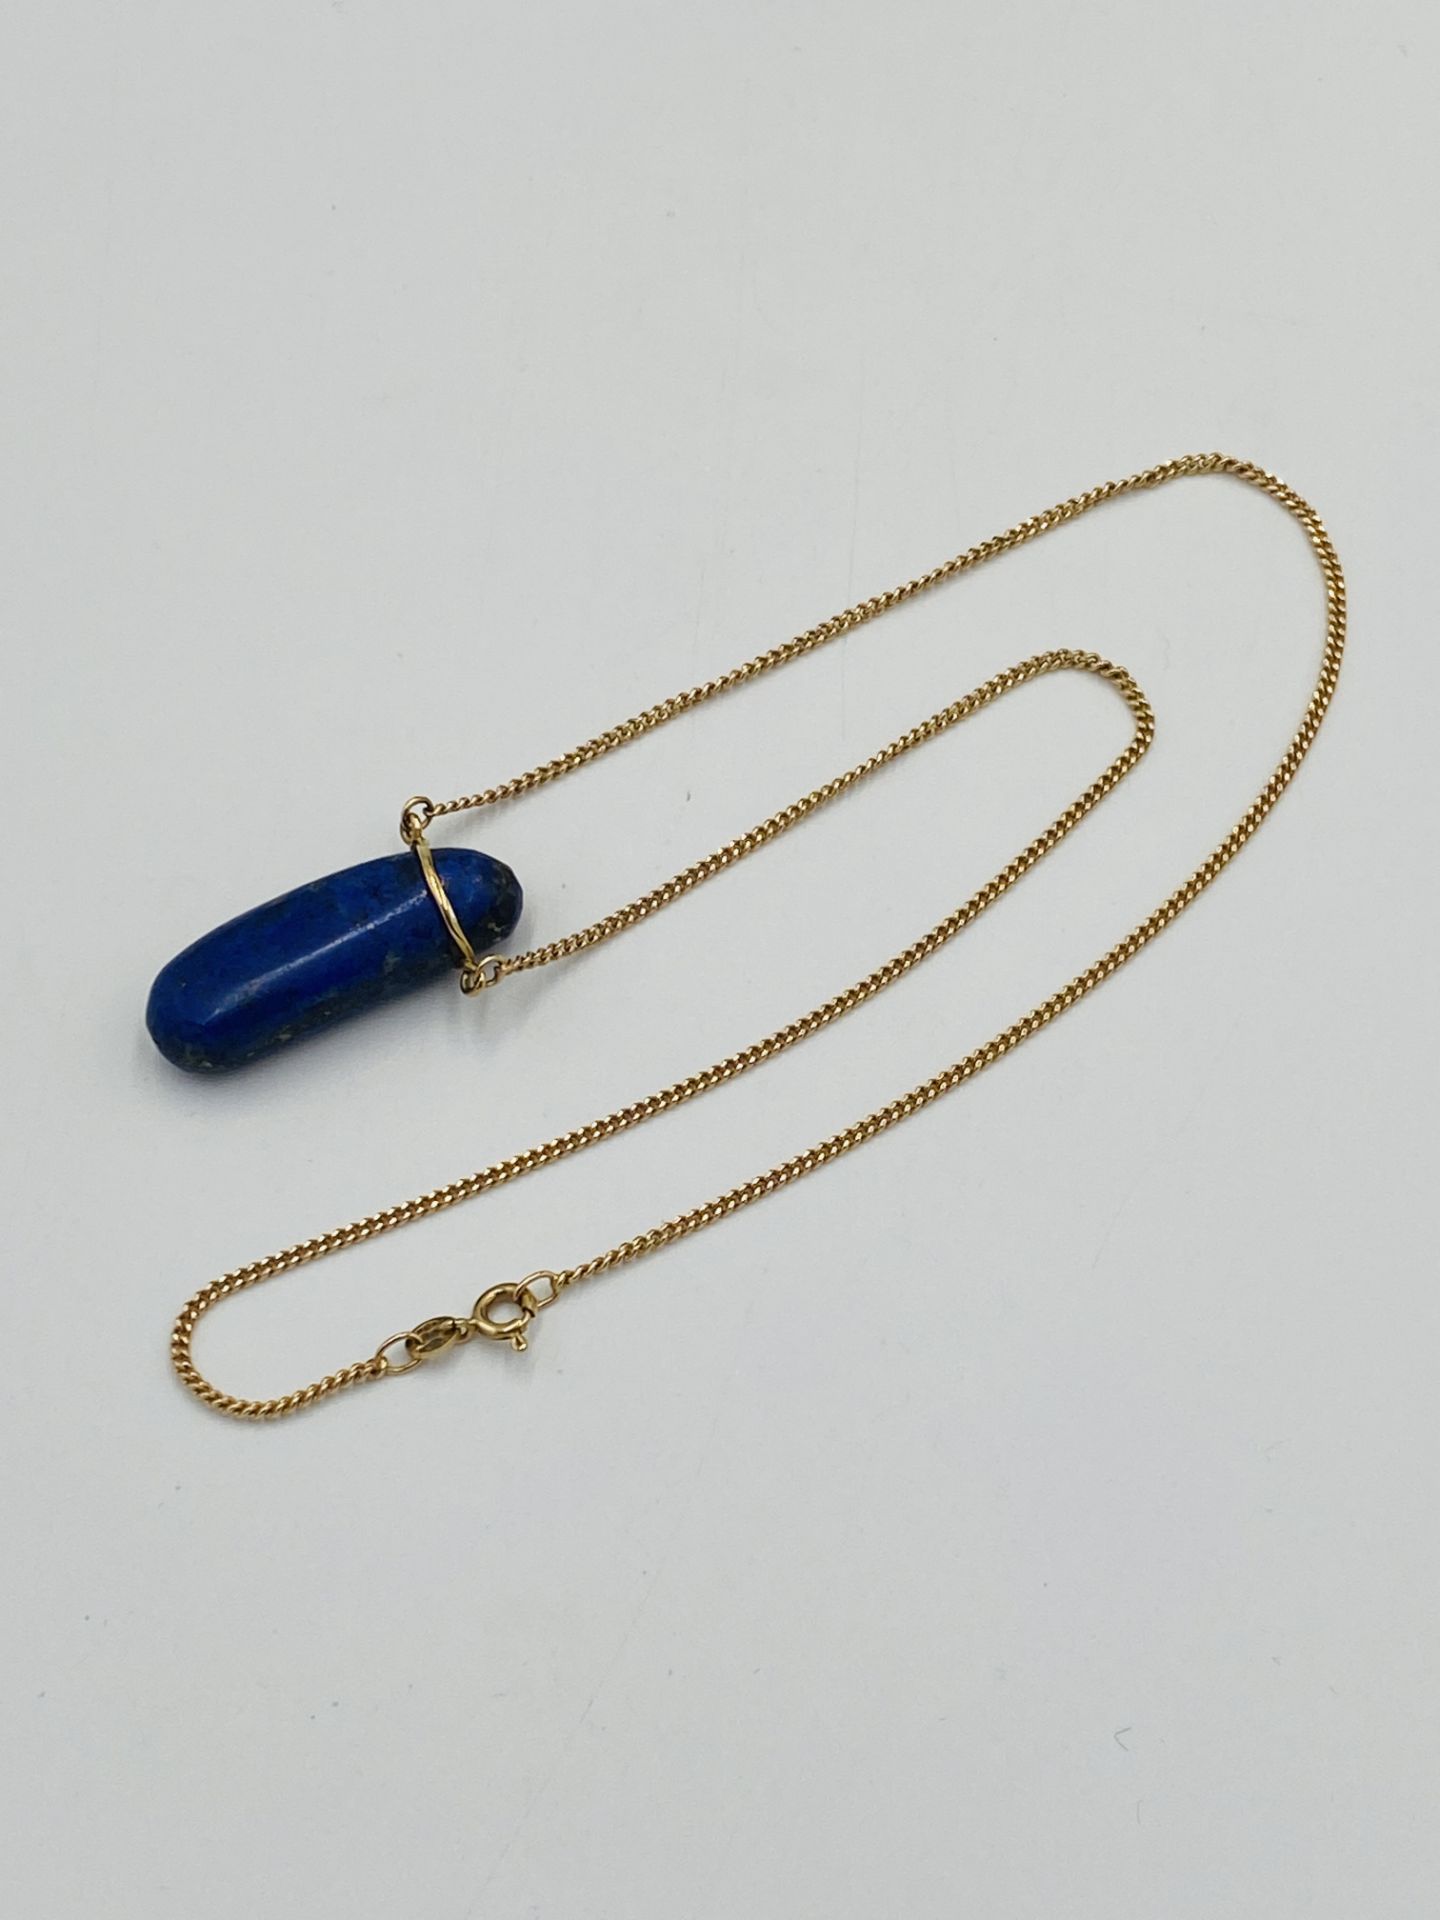 9ct gold necklace with a lapis pendant - Image 2 of 5